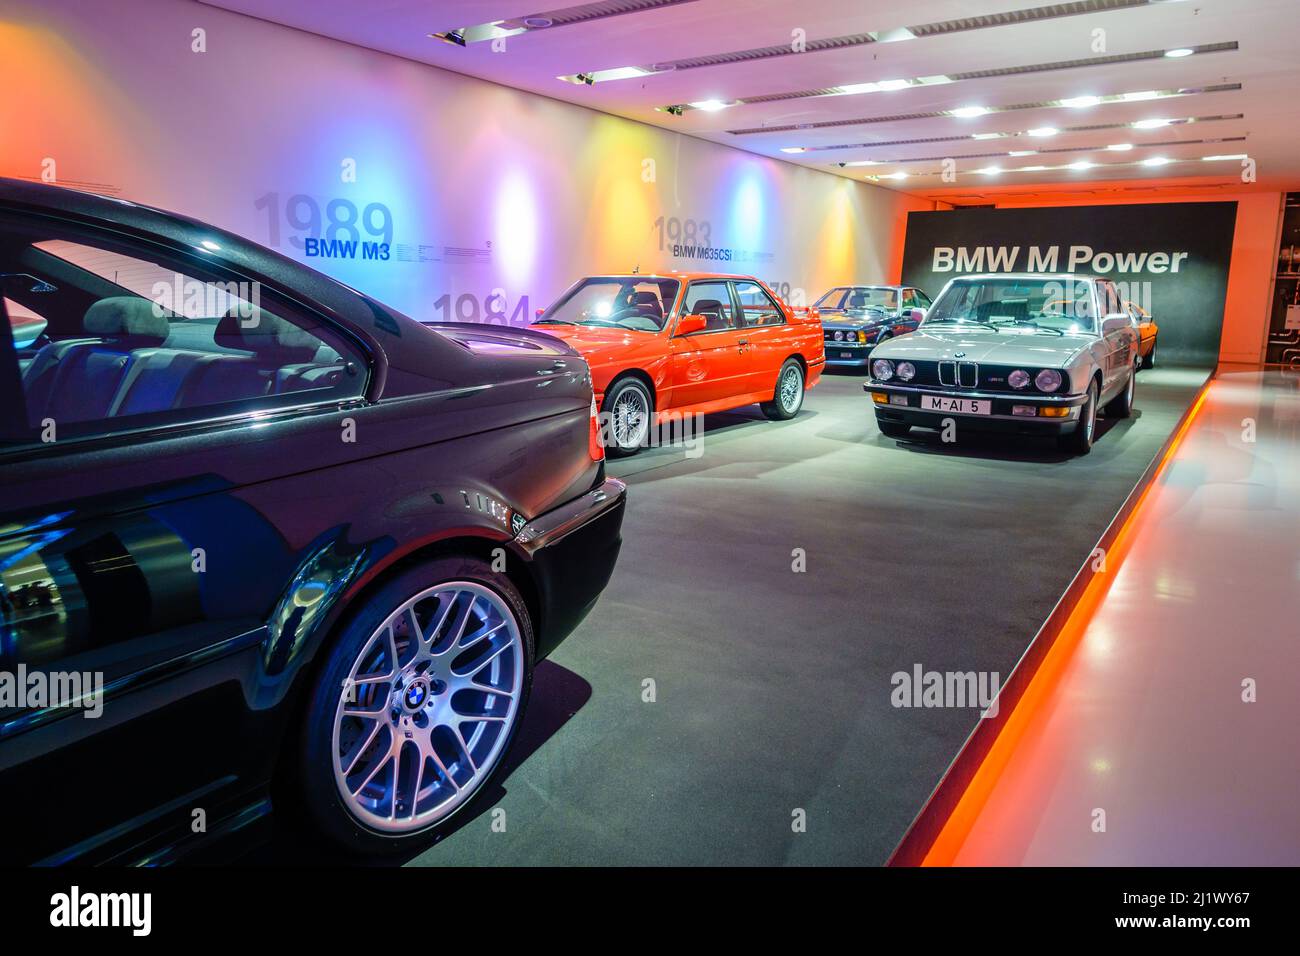 Munich, Germany, September 29, 2015: BMW M models lineup on display at BMW Museum in Munich, Germany Stock Photo